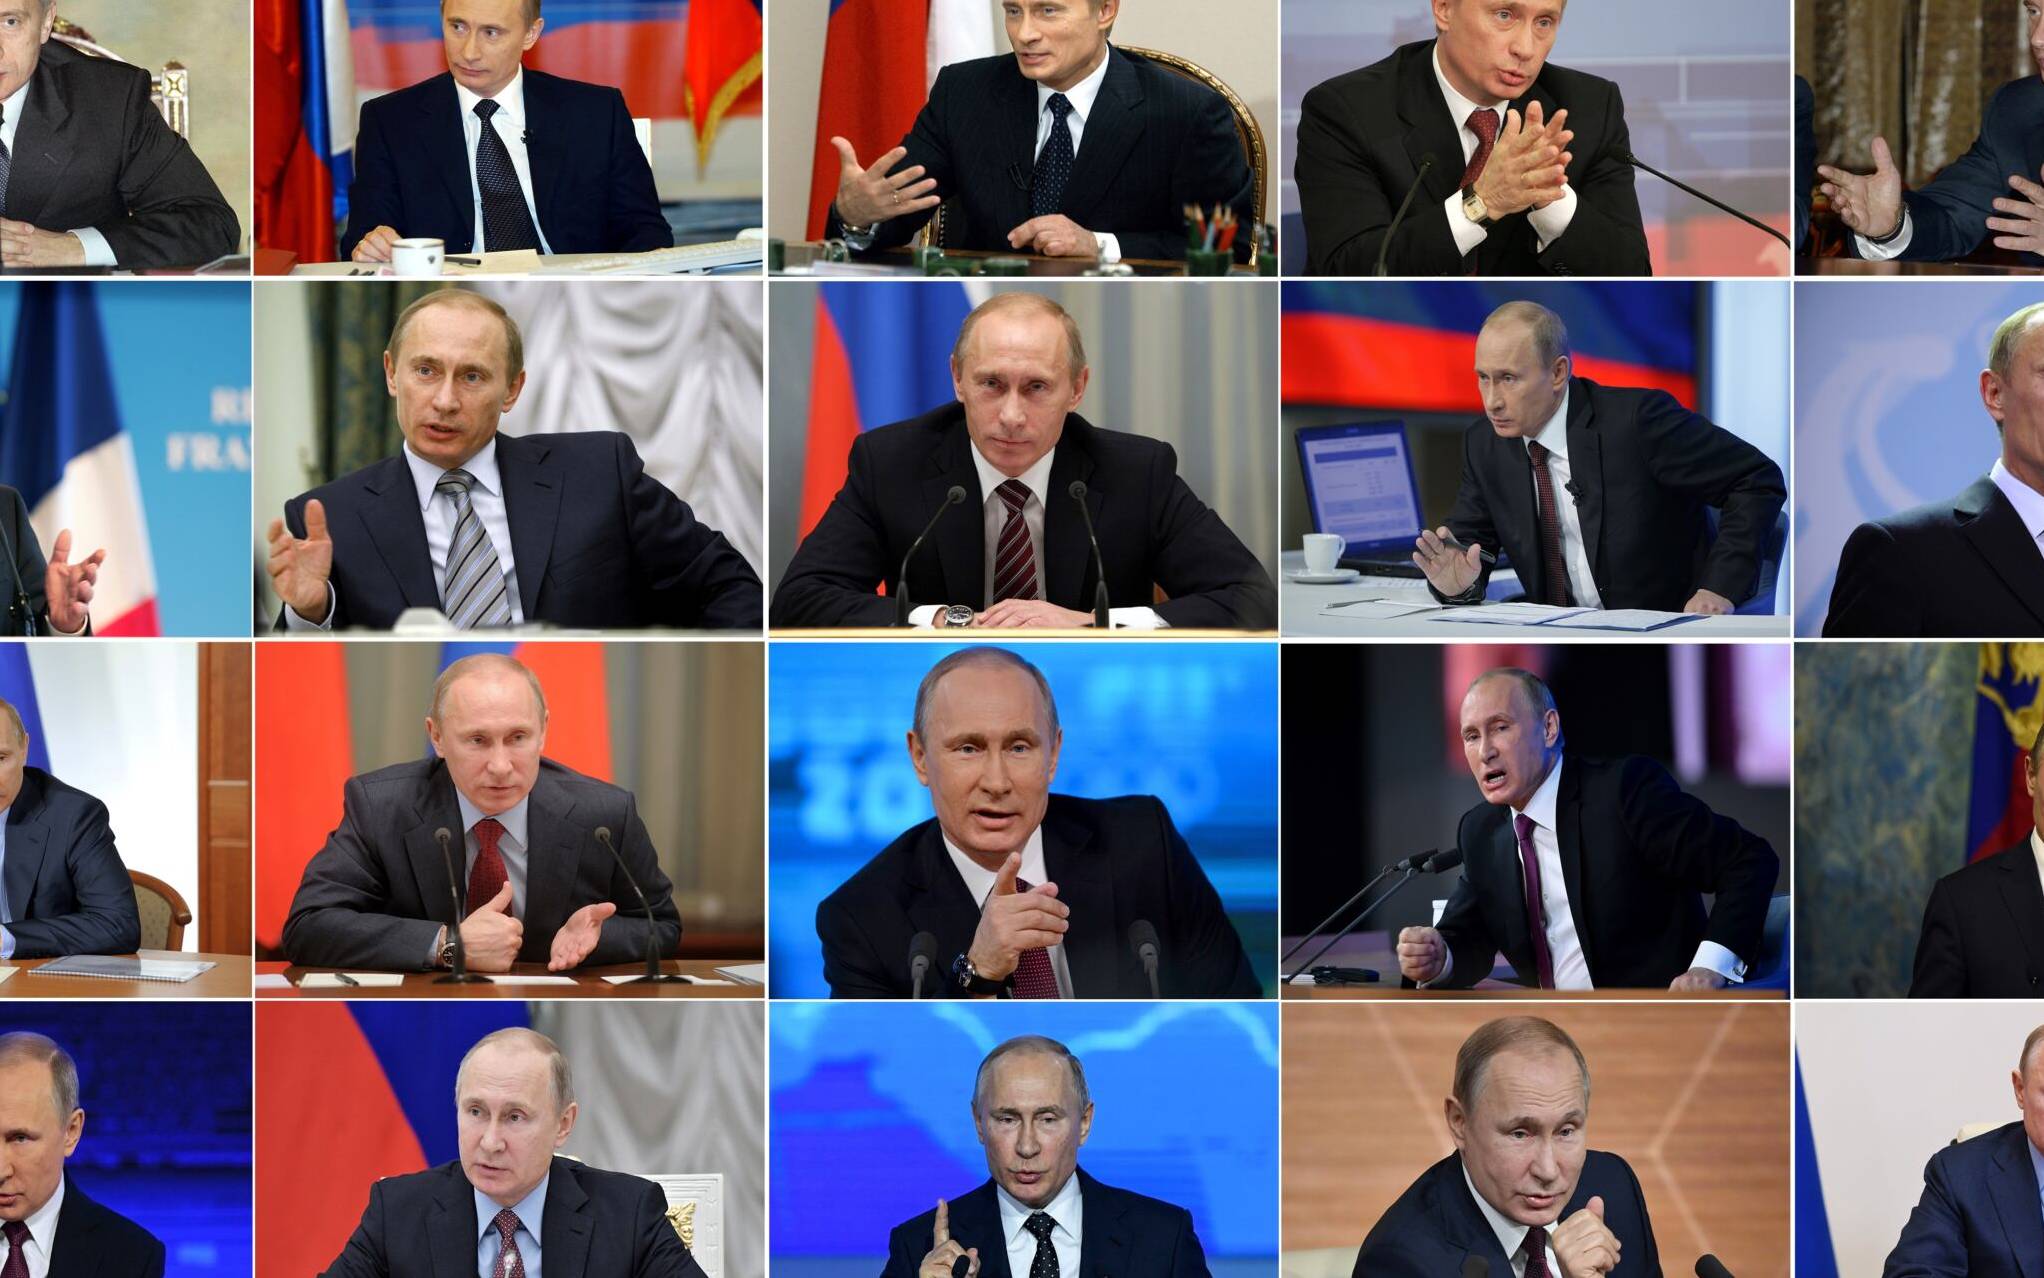 (COMBO/FILES) This combination of file photographs created on July 2, 2020, shows Russia's President Vladimir Putin as he - from Top L/Bottom R: meets with members of the cabinet in The Kremlin in Moscow on November 5, 2001, listens during a radio dialogue with the nation in Moscow on December 19, 2002, gestures as he talks to Russian journalists at his office in The Kremlin, Moscow on November 28, 2003, answers questions during his annual press conference at The Kremlin in Moscow on December 23, 2004, speaks during a meeting with Germany's Economics Minister Michael Glos in the Novo-Ogaryovo presidential residence outside Moscow on December 8, 2005, speaks a press conference during a mini-summit with French President Jacques Chirac and German Chancellor Angela Merkel in Compiegne, northern France on September 23, 2006, speaks during a meeting with German Foreign Minister Frank-Walter Steinmeier at The Kremlin in Moscow on December 18, 2007, speaks during the last Government members meeting of 2008 in Moscow on December 29, 2008, gestures while answering a question during his annual televised phone-in show in Moscow on December 3, 2009, addresses a press conference at the chancellery with German Chancellor Angela Merkel in Berlin on November 26, 2010, speaks at a coordination meeting of his All-Russian Popular Front's staff at the government headquarters in Moscow, on December 27, 2011,  speaks as he meets university and college rectors  in the government headquarters in Moscow, on February 14, 2012, speaks during his annual press conference in Moscow on December 19, 2013, speaks during his annual press conference in Moscow on December 18, 2014, addresses a press conference, during the COP21 United Nations conference on climate change at Le Bourget on the outskirts of Paris on November 30, 2015, speaks during his annual press conference in Moscow on December 23, 2016, meets with top officials from the Federation Council and the State Duma at The Kremlin in Moscow on